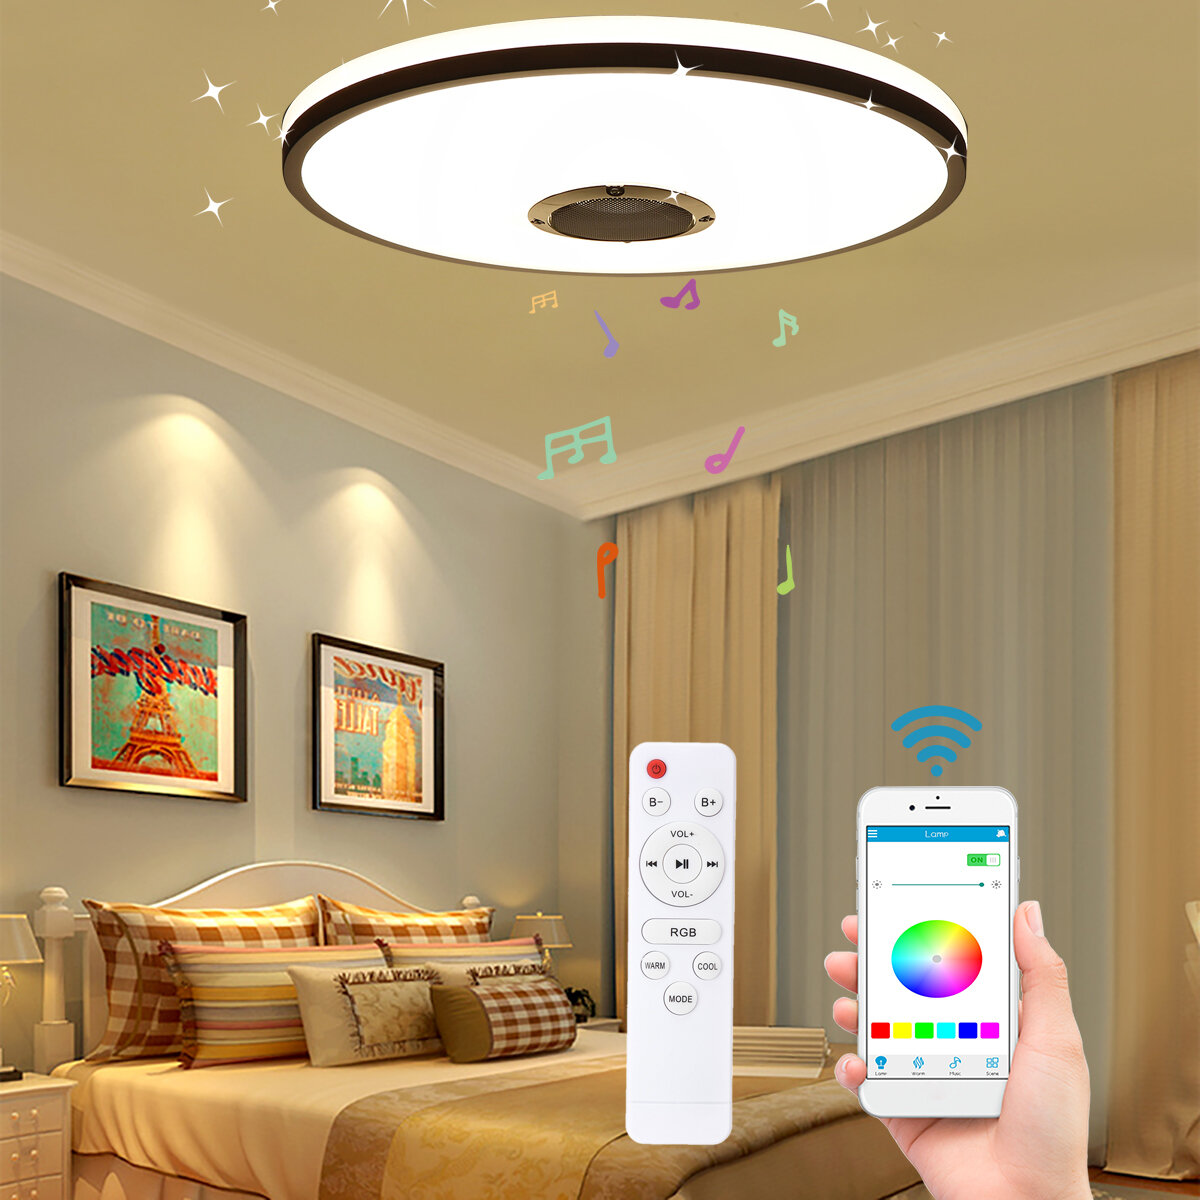 

ARILUX 30W 220V 33cm Modern Dimmable LED Ceiling Lamp RGBW WiFi Bluetooth Music Smart Ceiling Light APP+Remote Control